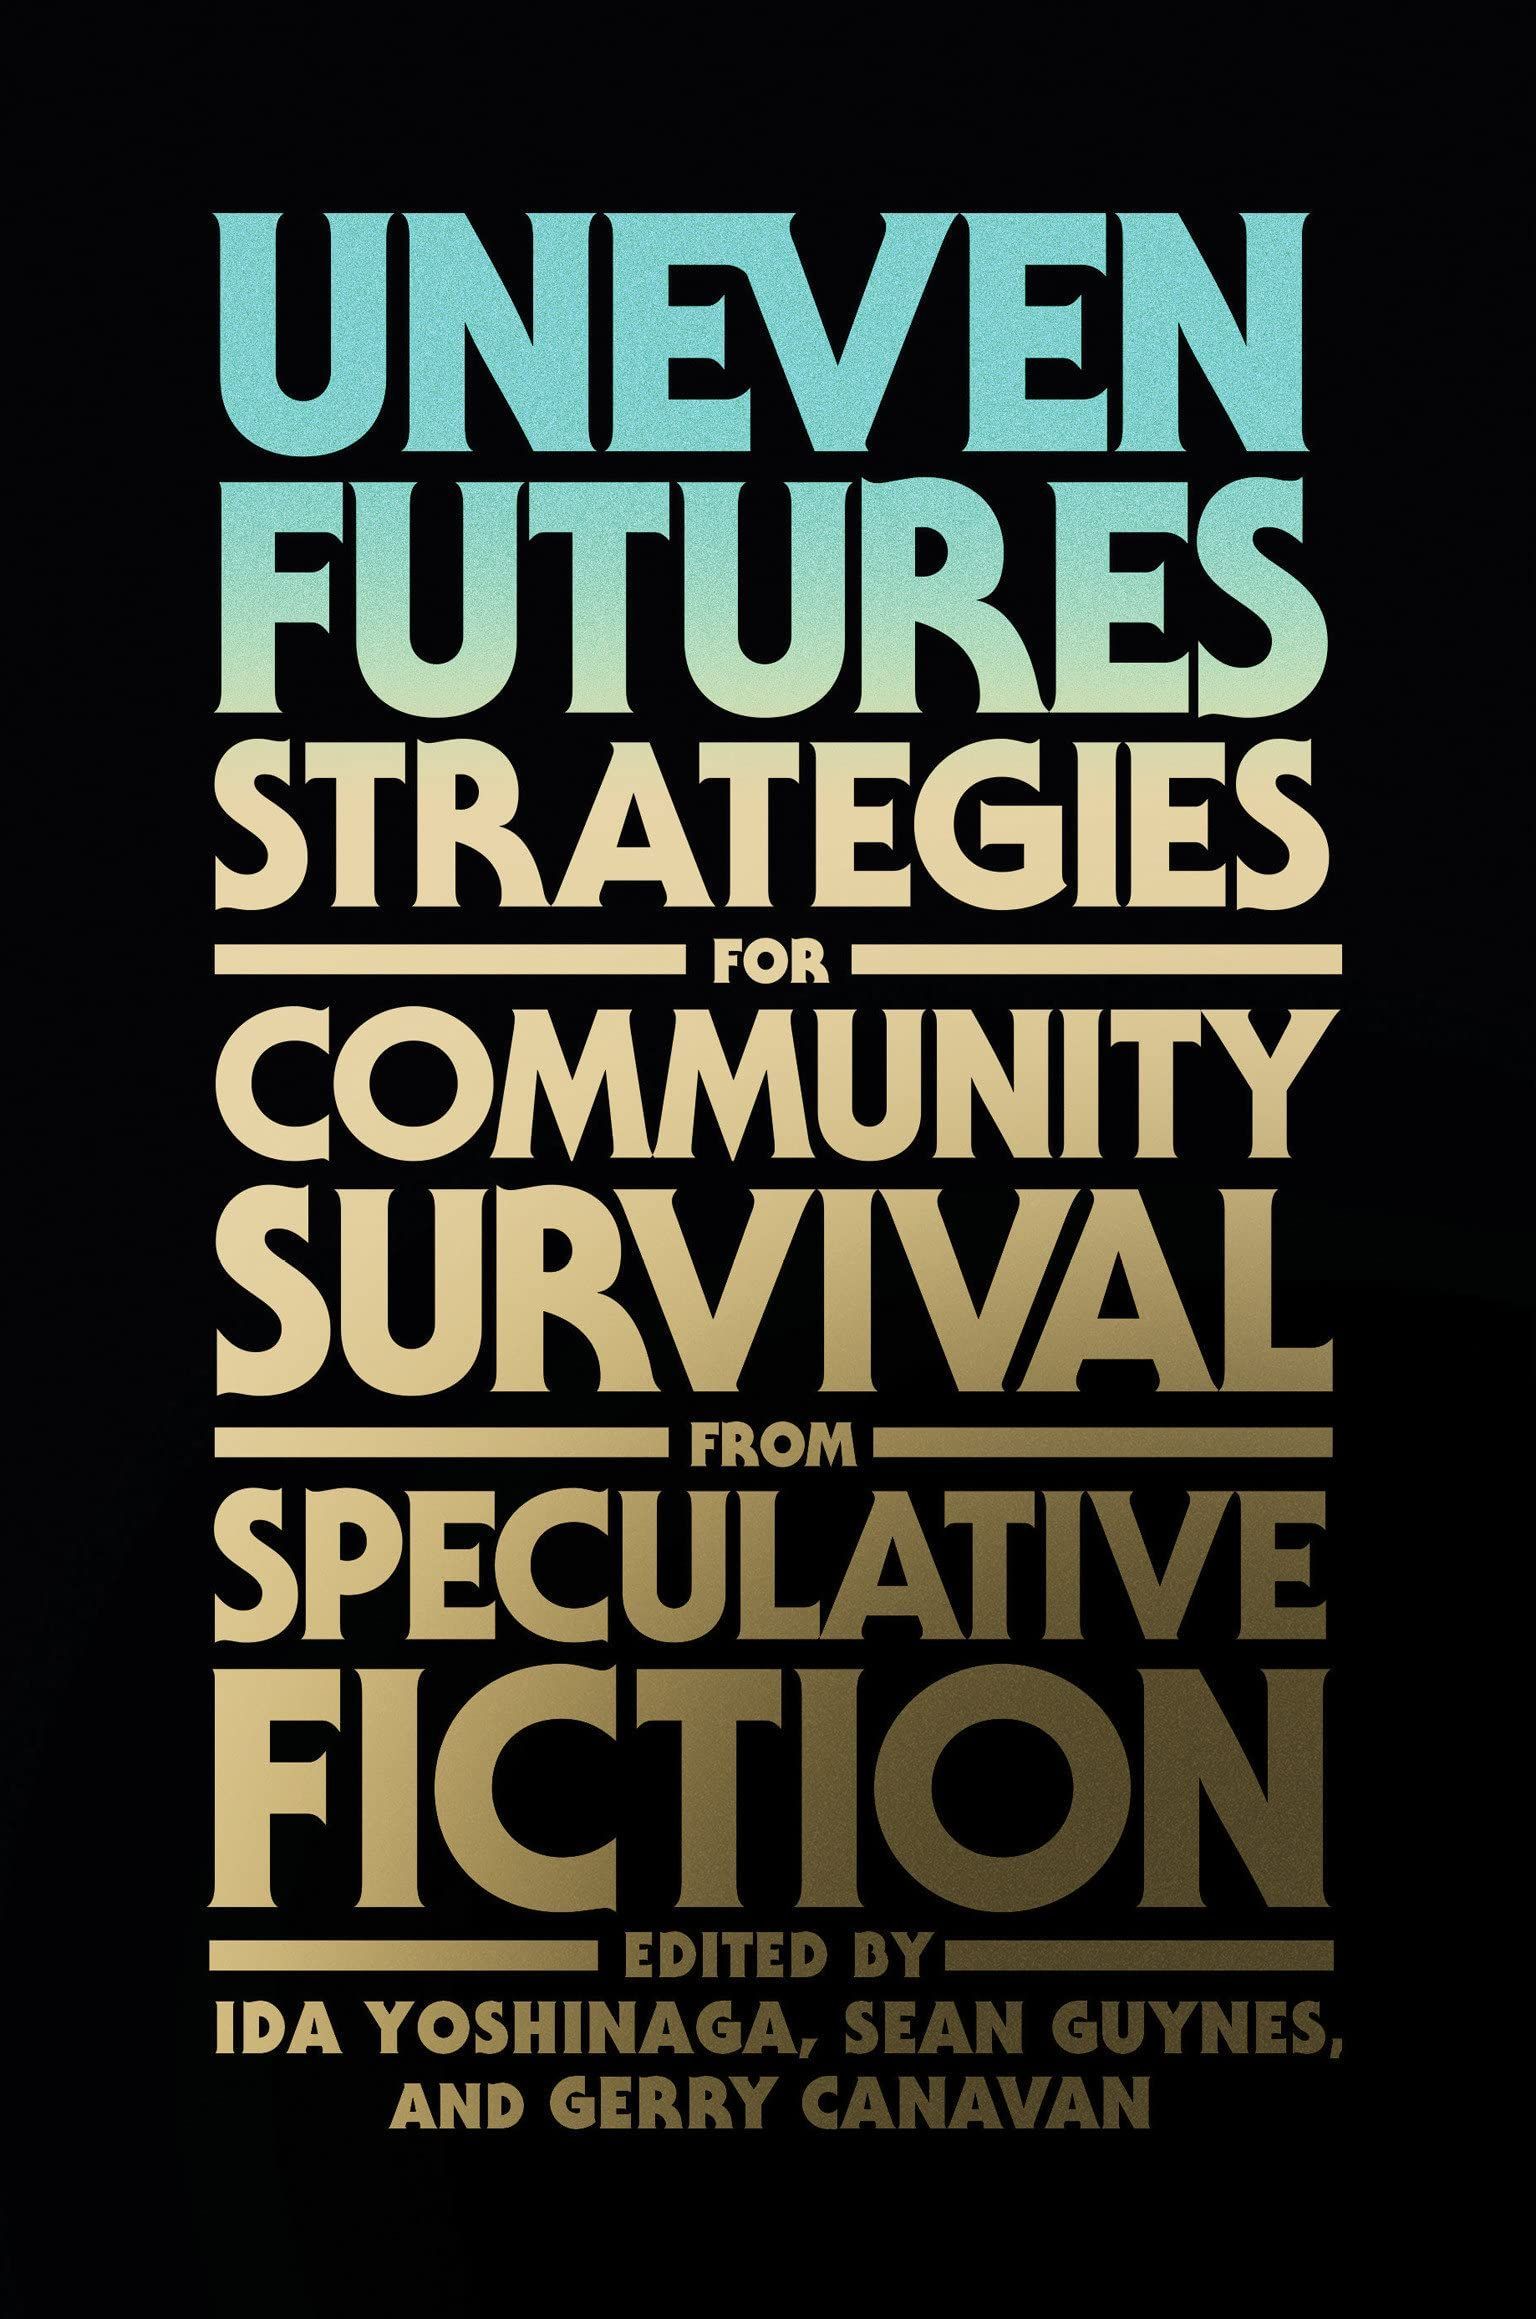 Science Fiction as Mode of Action: On MIT Press’s “Uneven Futures”